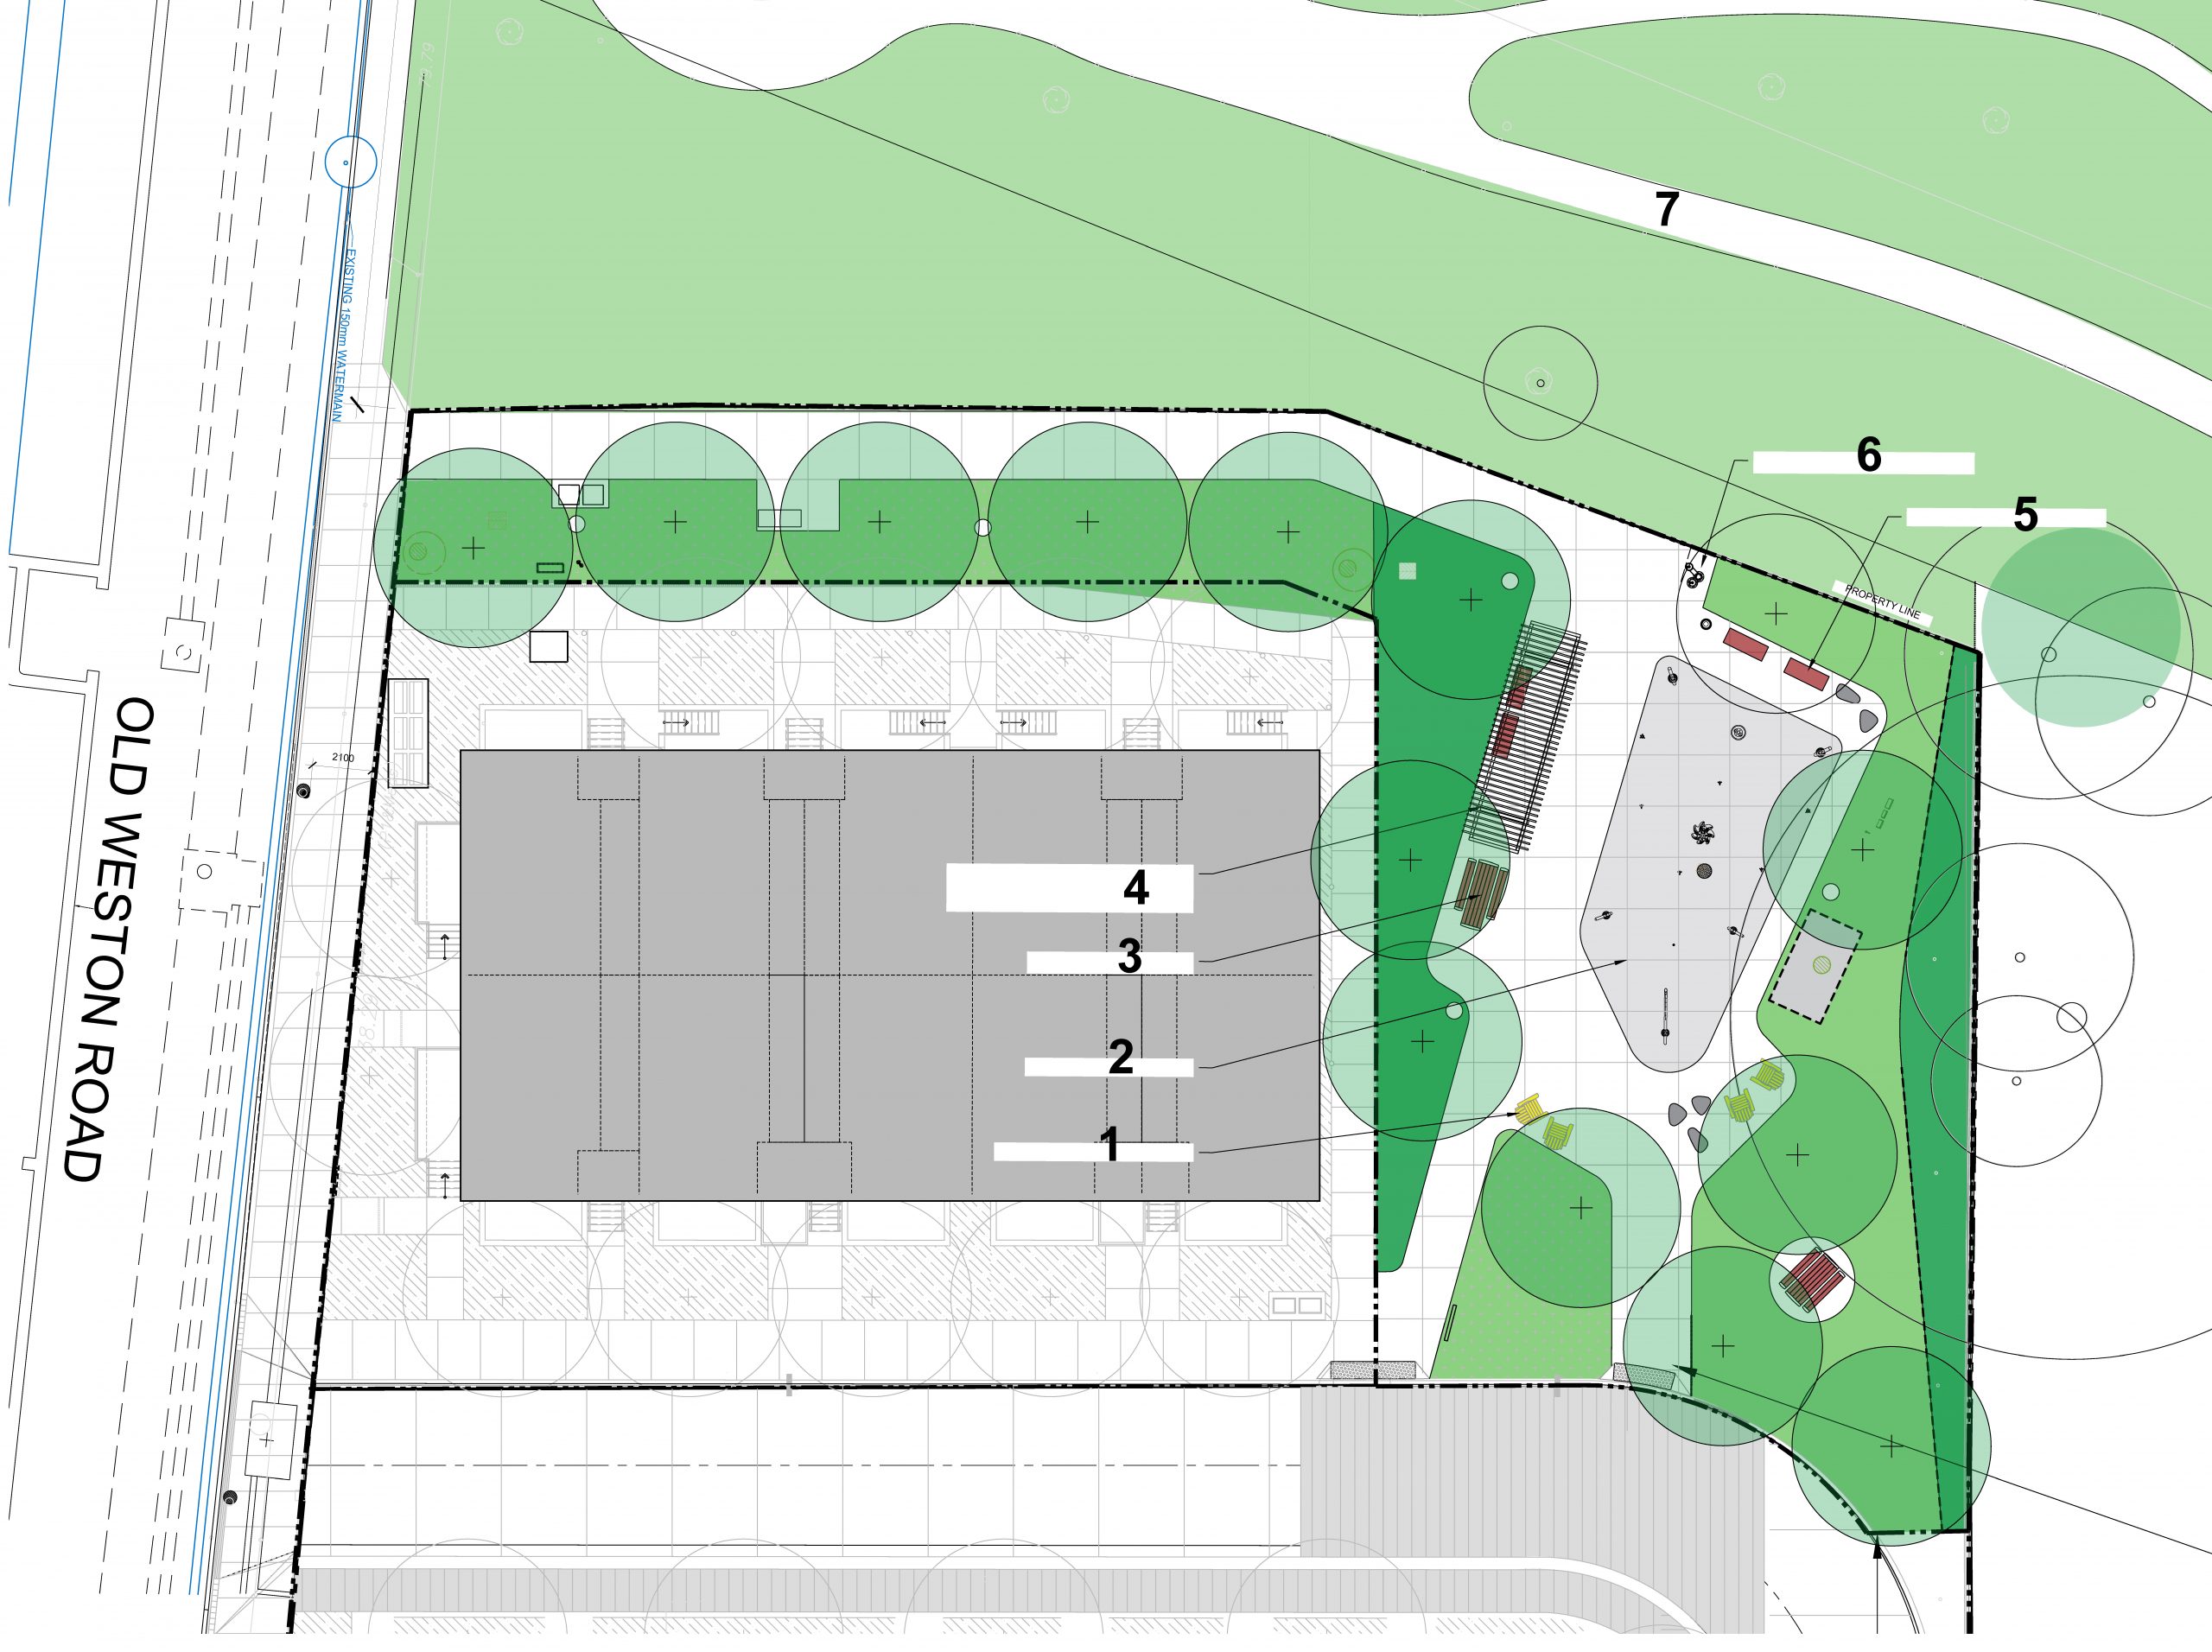 The design plan for the S.A.D.R.A. park expansion project with numbered labels showing the location of the park features and amenities. From bottom left to top rights, it includes a seating area near the splash pad, a picnic table, a shade structure with benches, a seating area and water fountain near existing green space at the north side of the park and the existing park trail. 